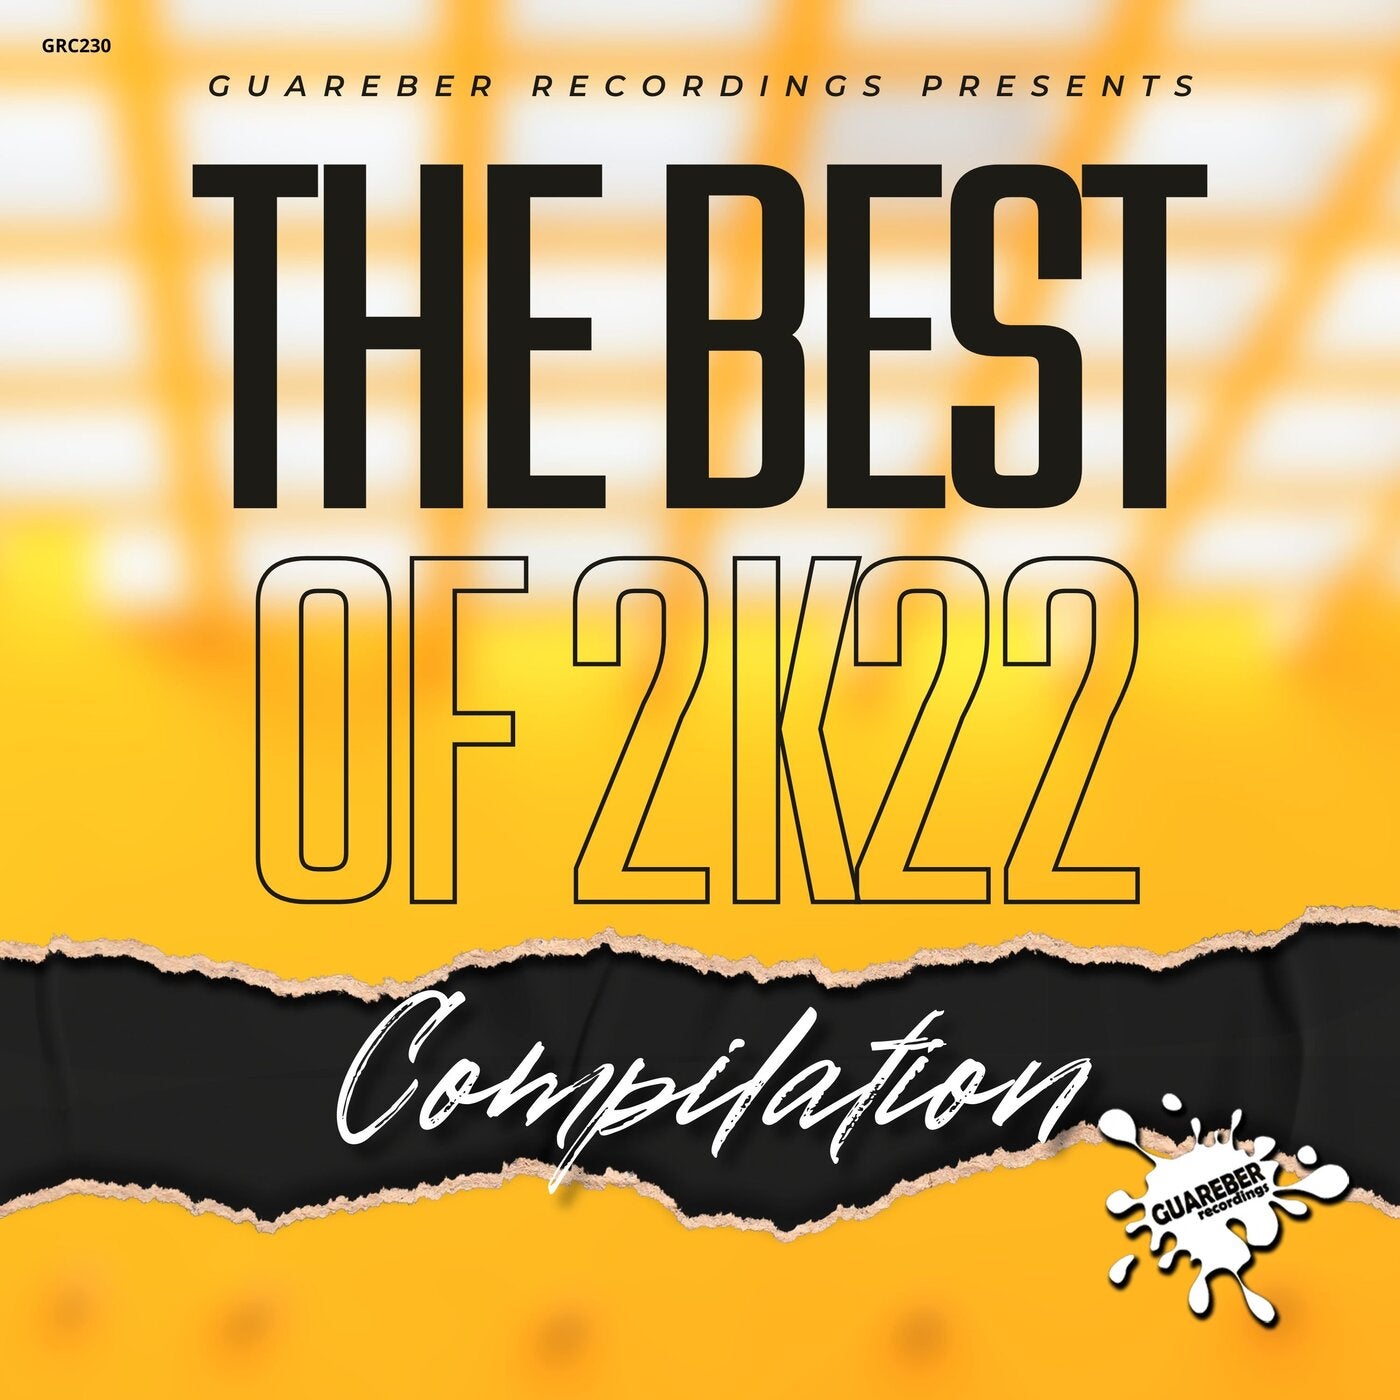 The Best Of 2K22 Compilation